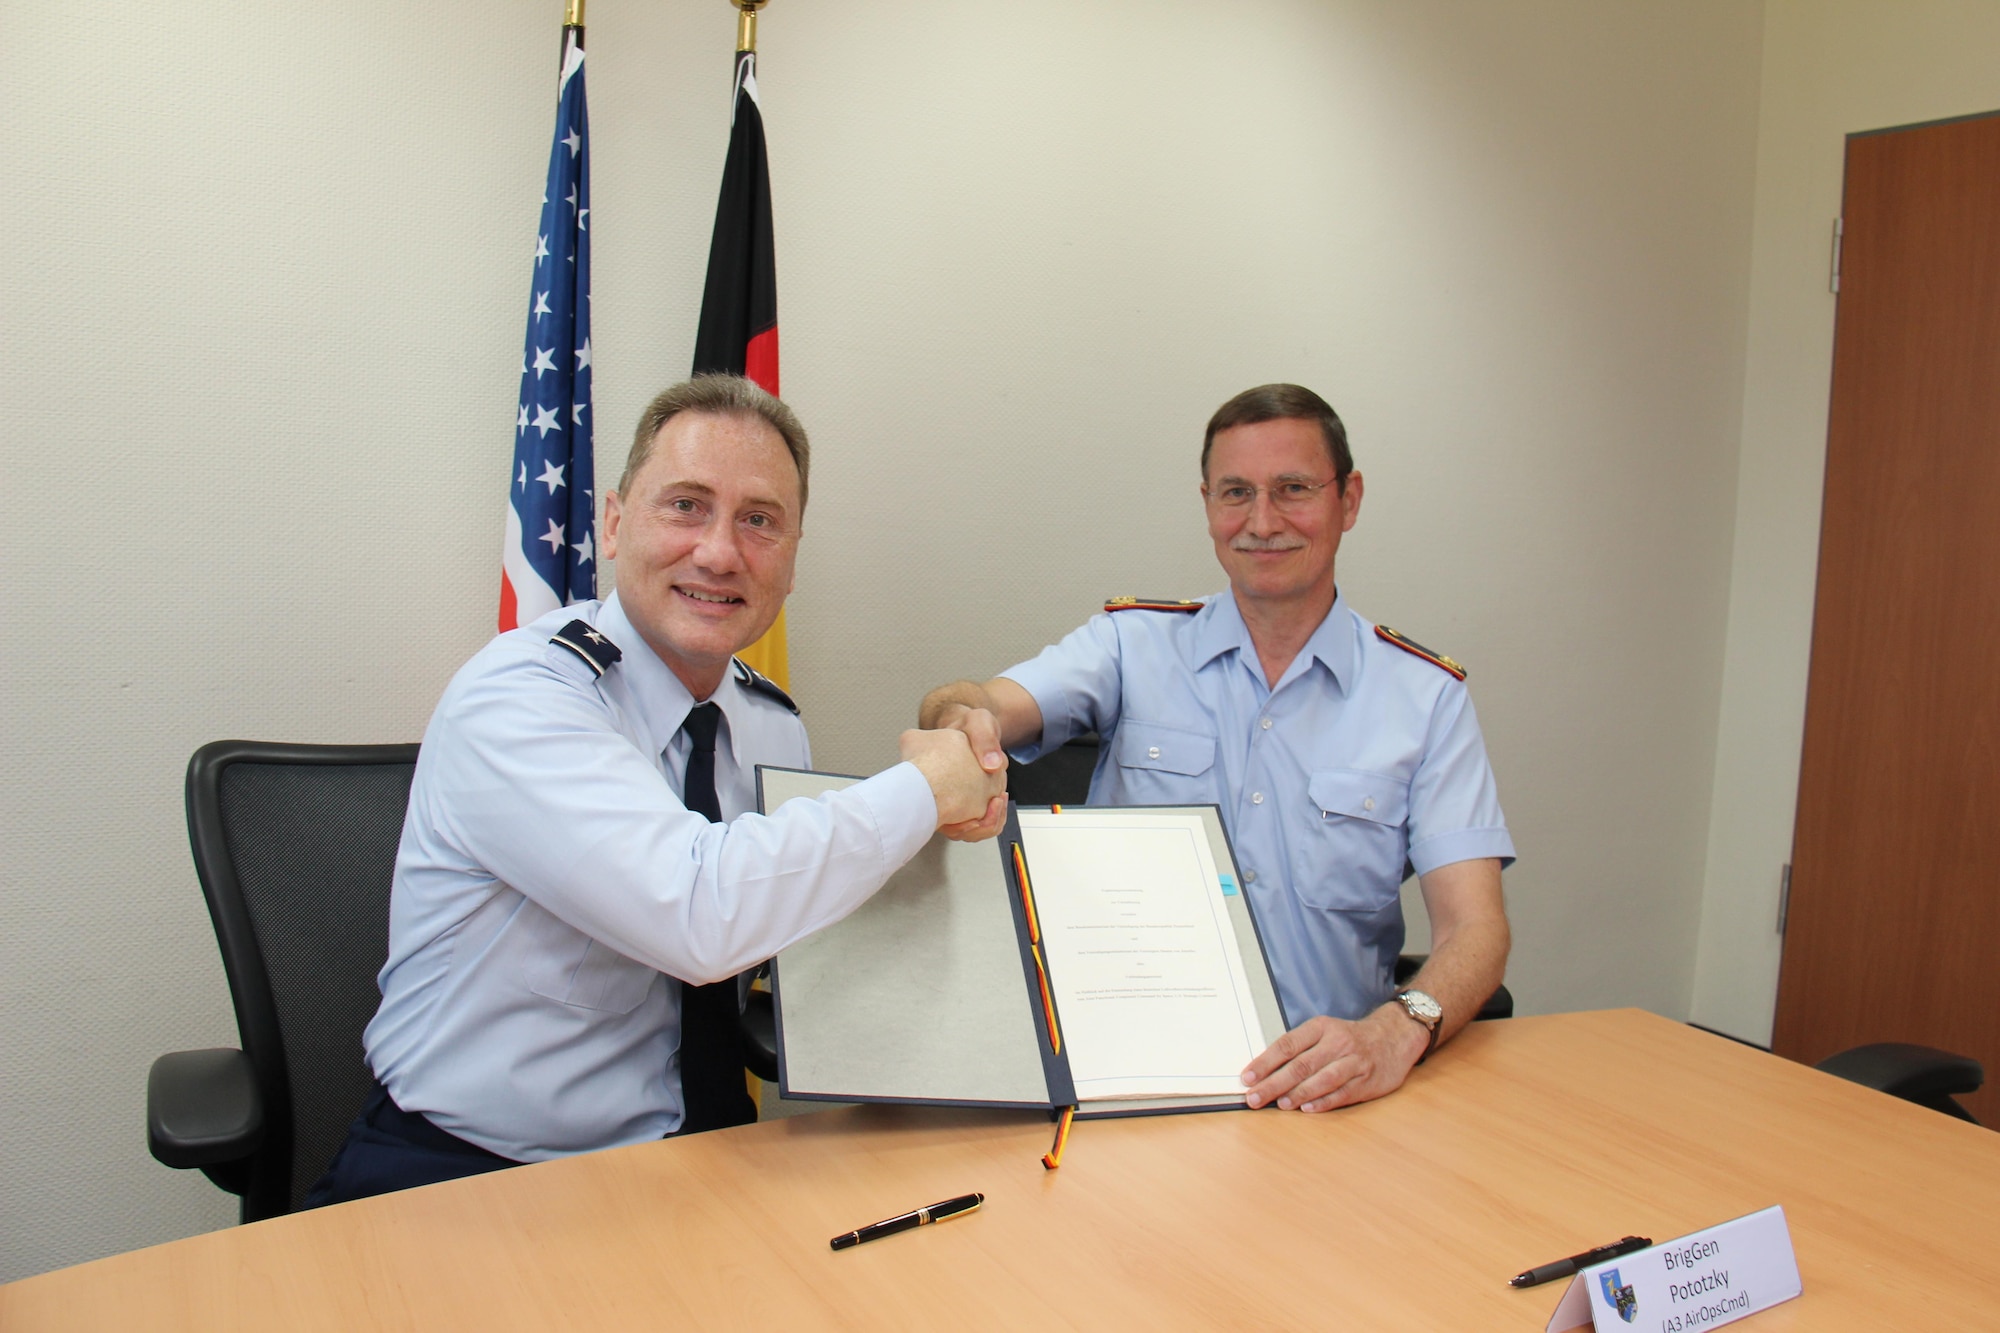 U.S. Air Force Maj. Gen. Clinton Crosier (left), the U.S. Strategic Command (USSTRATCOM) director of plans and policy, and German Luftwaffe (air force) Brig. Gen. Burkhart Prototzky, the department head and head of the Luftwaffe Operations Center, meet for the signing of a memorandum of agreement in Uedem, Germany, June 1, 2017. The MoA authorizes, for the first time, the assignment of a German liaison officer to USSTRATCOM’s Joint Functional Component Command for Space under the Multinational Space Collaboration  effort. The MSC will explore mutual capabilities and identify opportunities for greater integration by colocating additional allies and partners with U.S. space operators. 